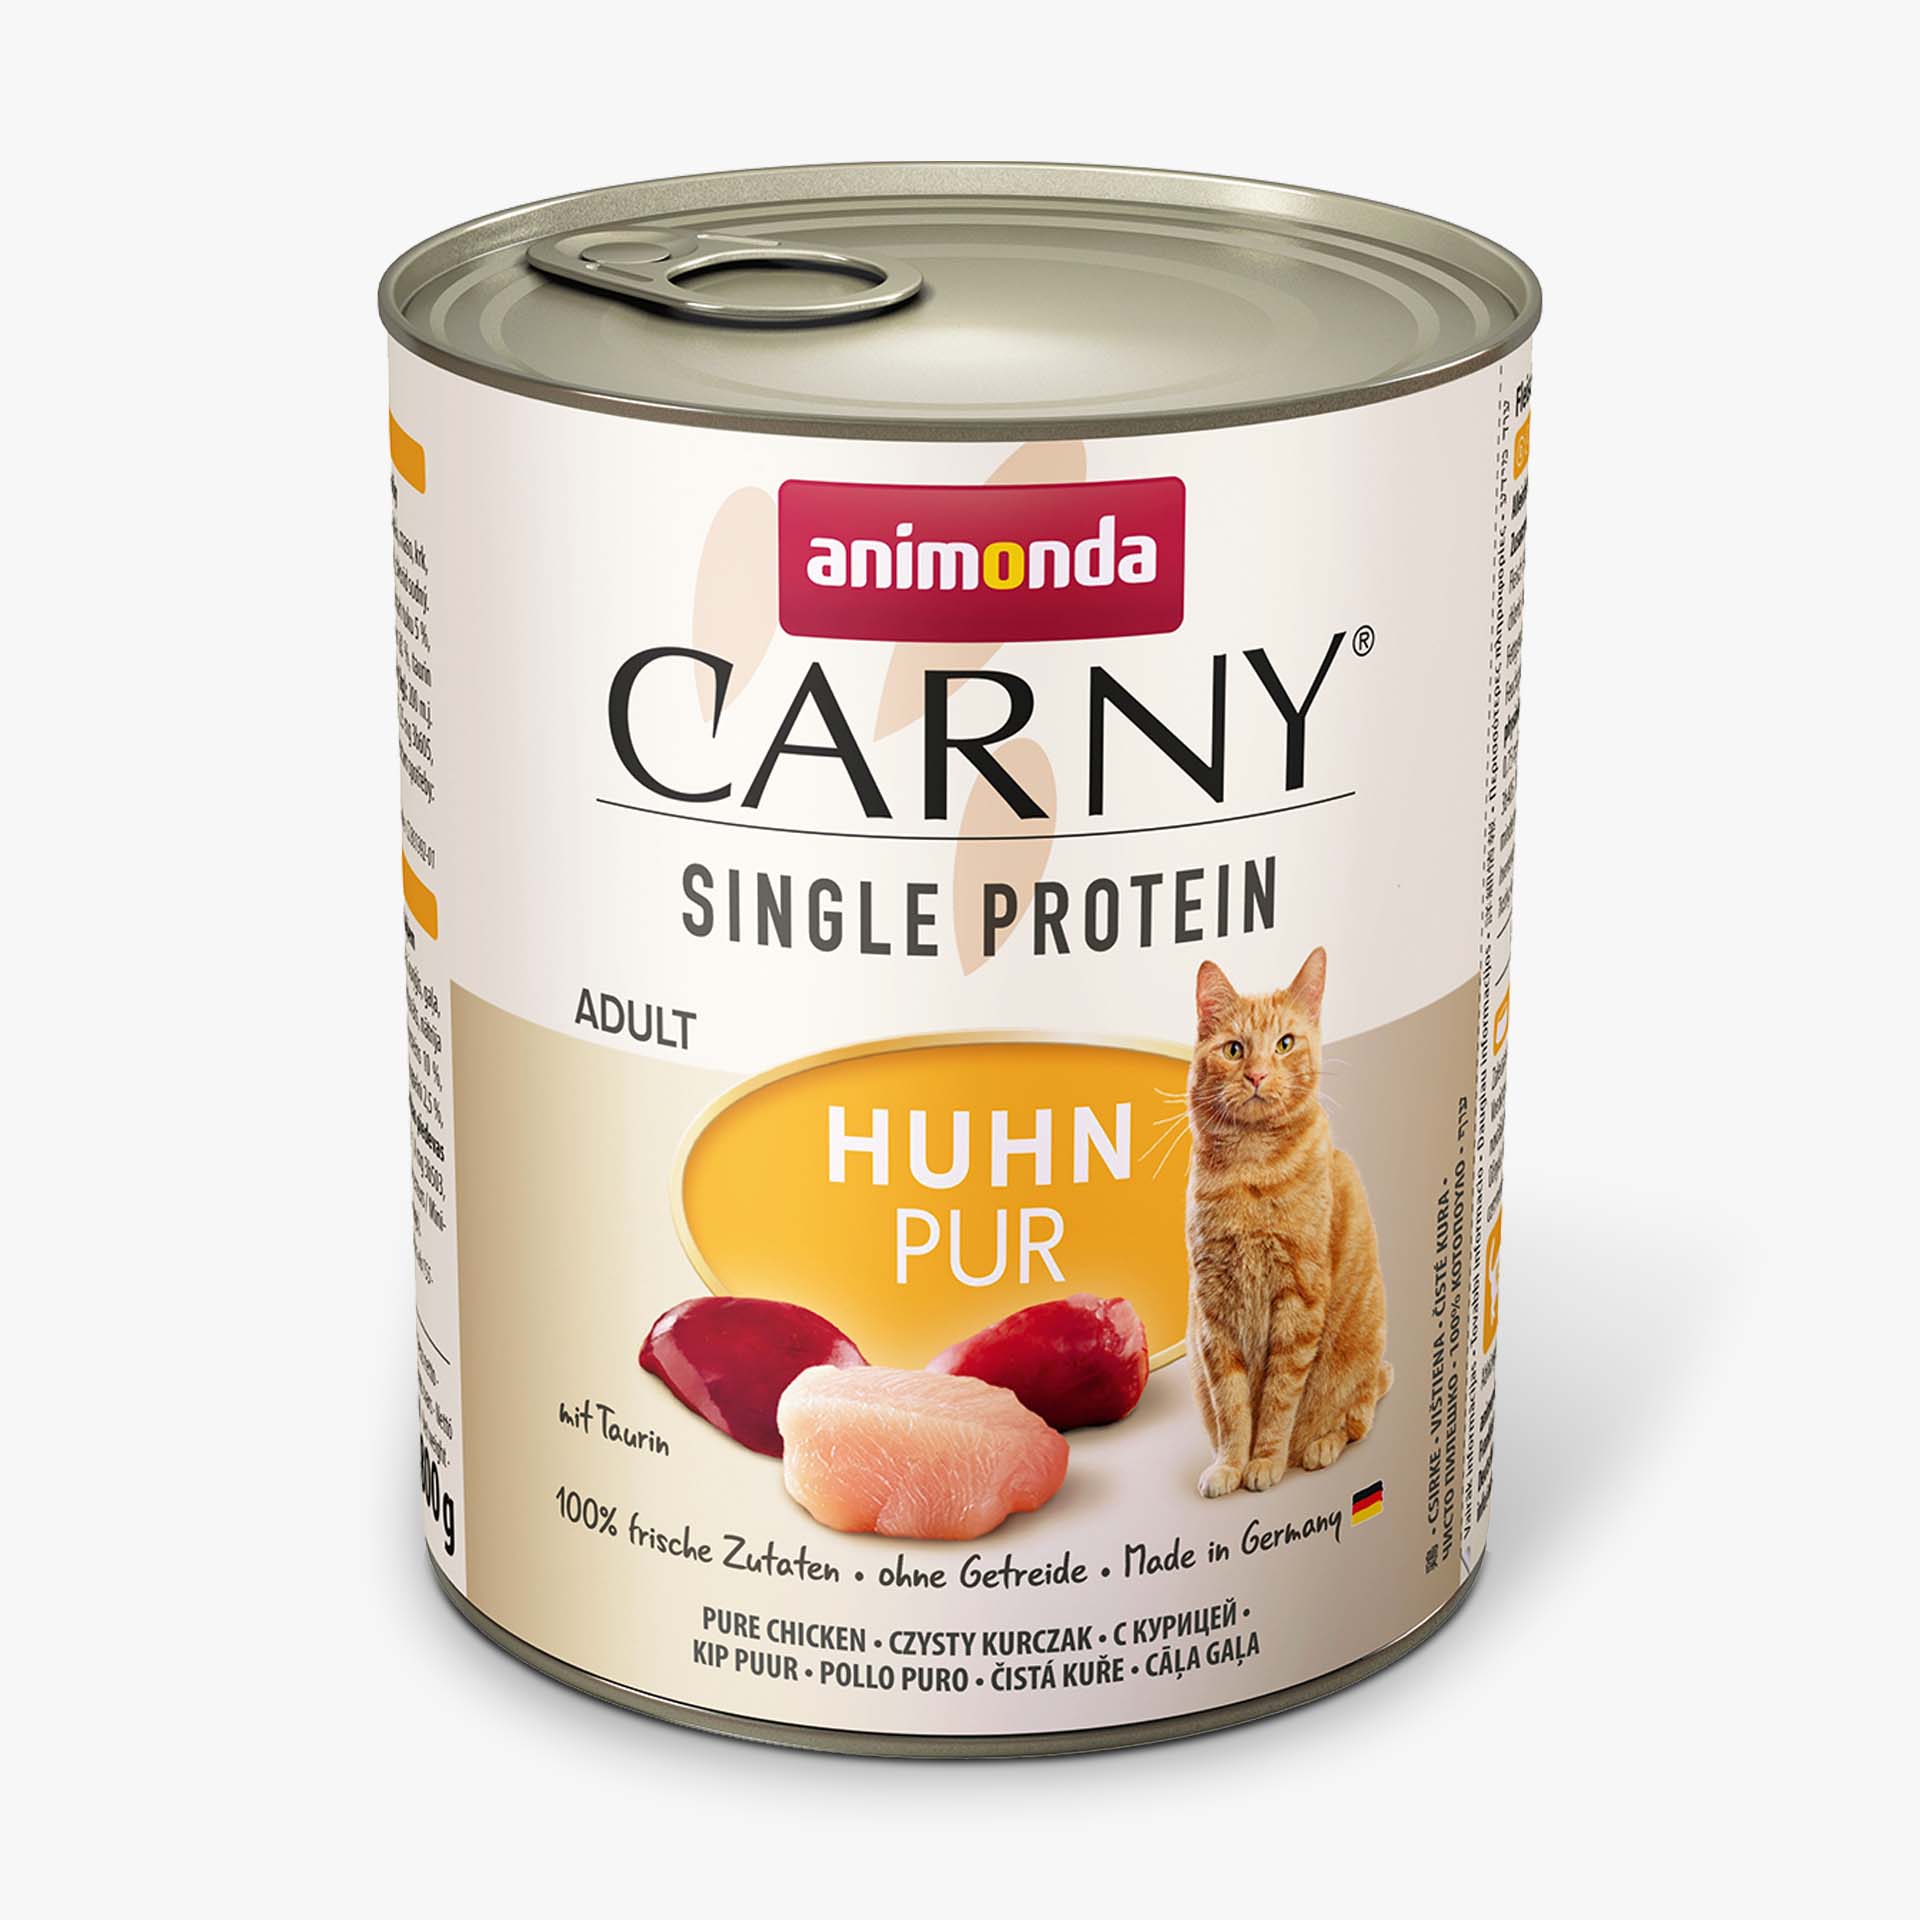 Carny pure chicken Single Protein